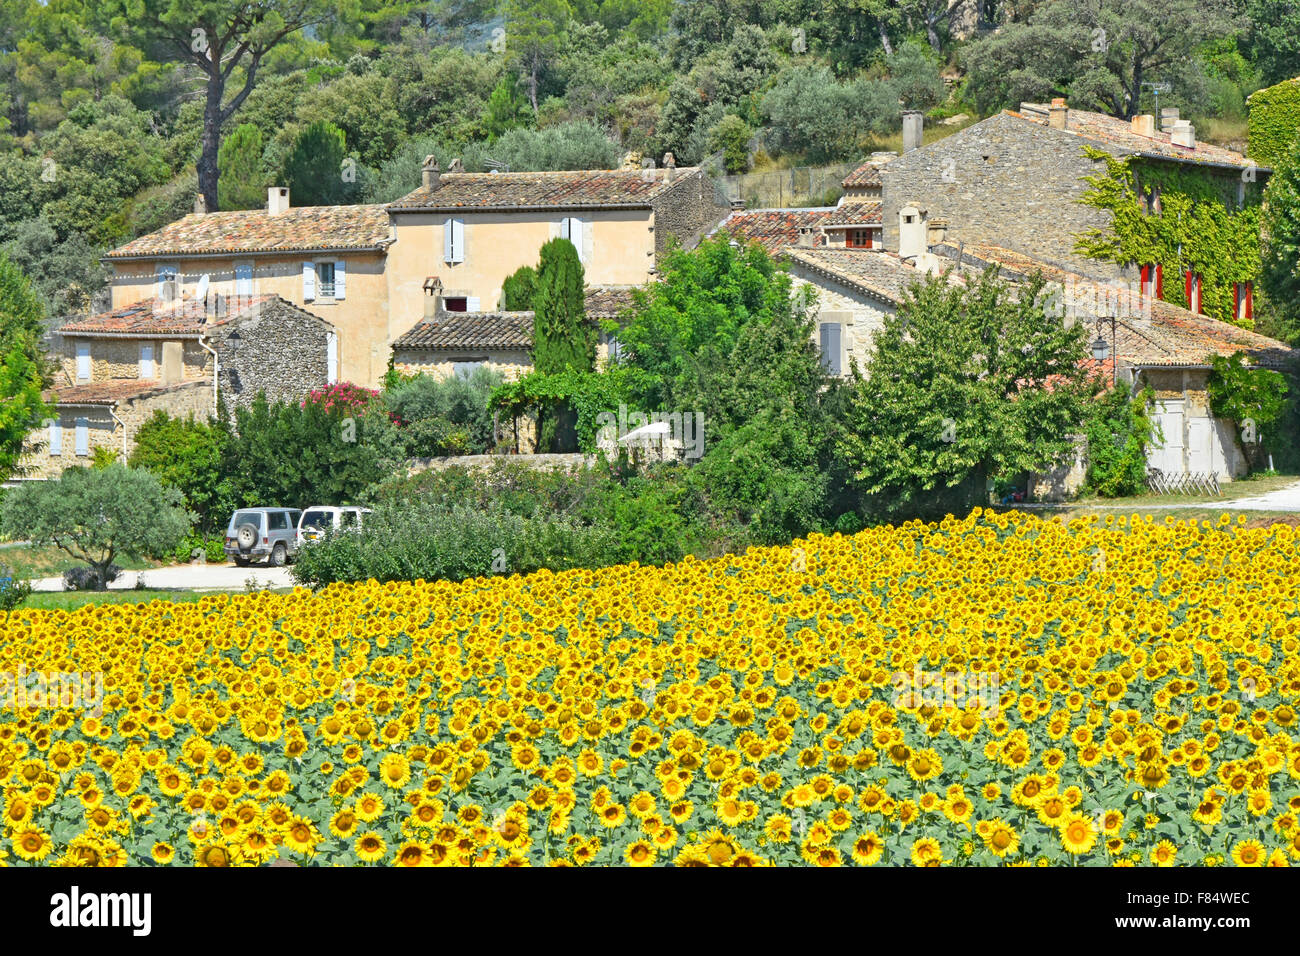 Lourmarin village landscape in the French Luberon countryside area of Provence cluster of rural dwellings beside sunflowers crop in farm field France Stock Photo